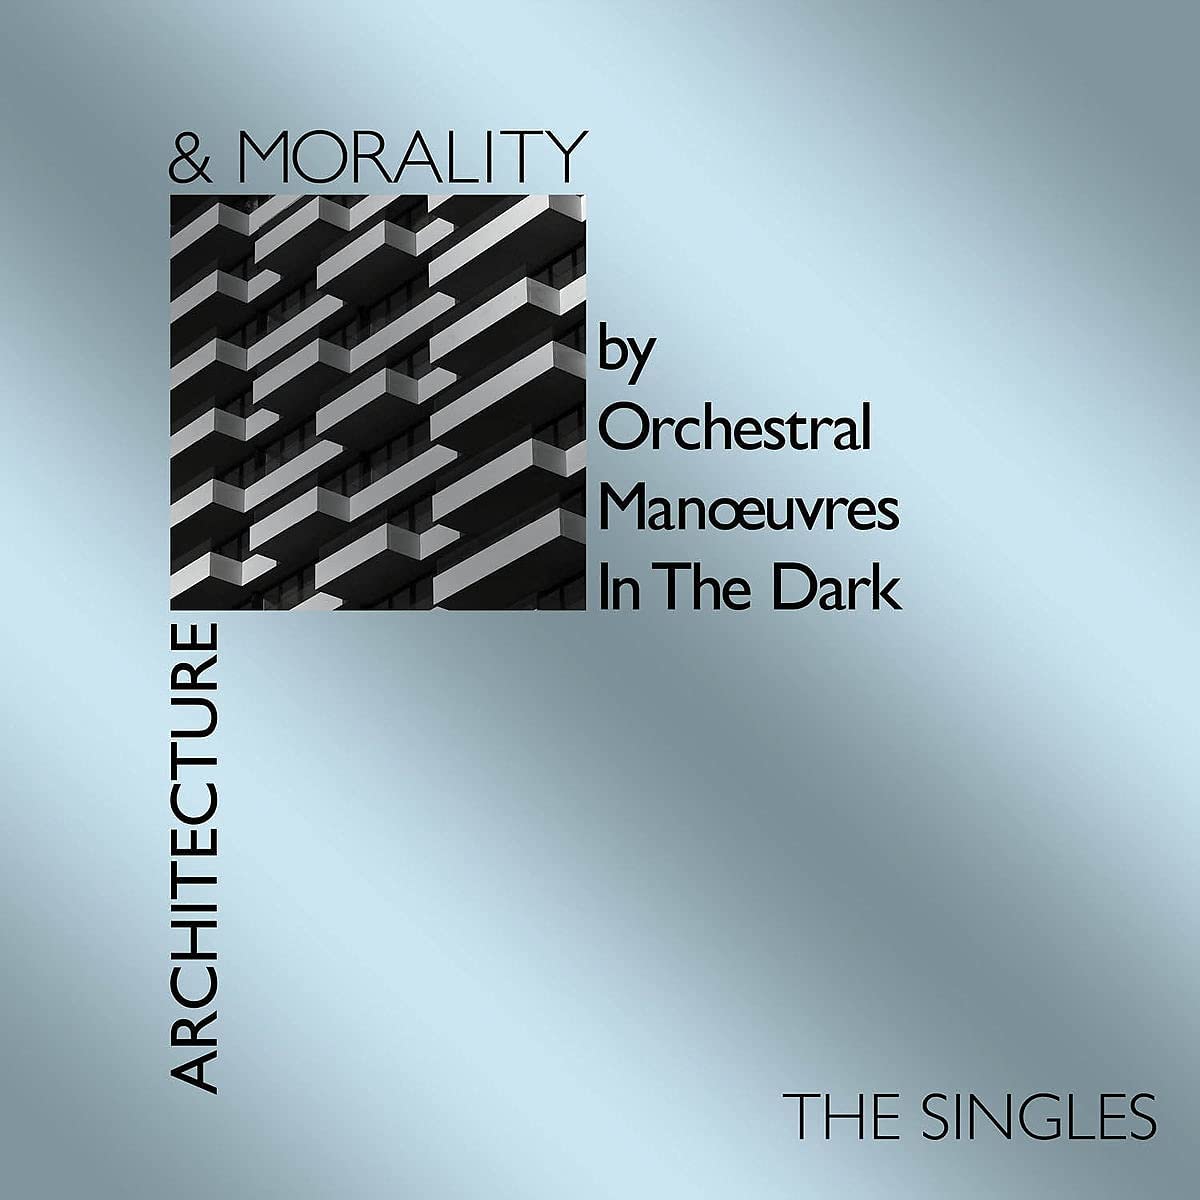 Orchestral Manoeuvres in the Dark - Architecture & Morality Singles - CD